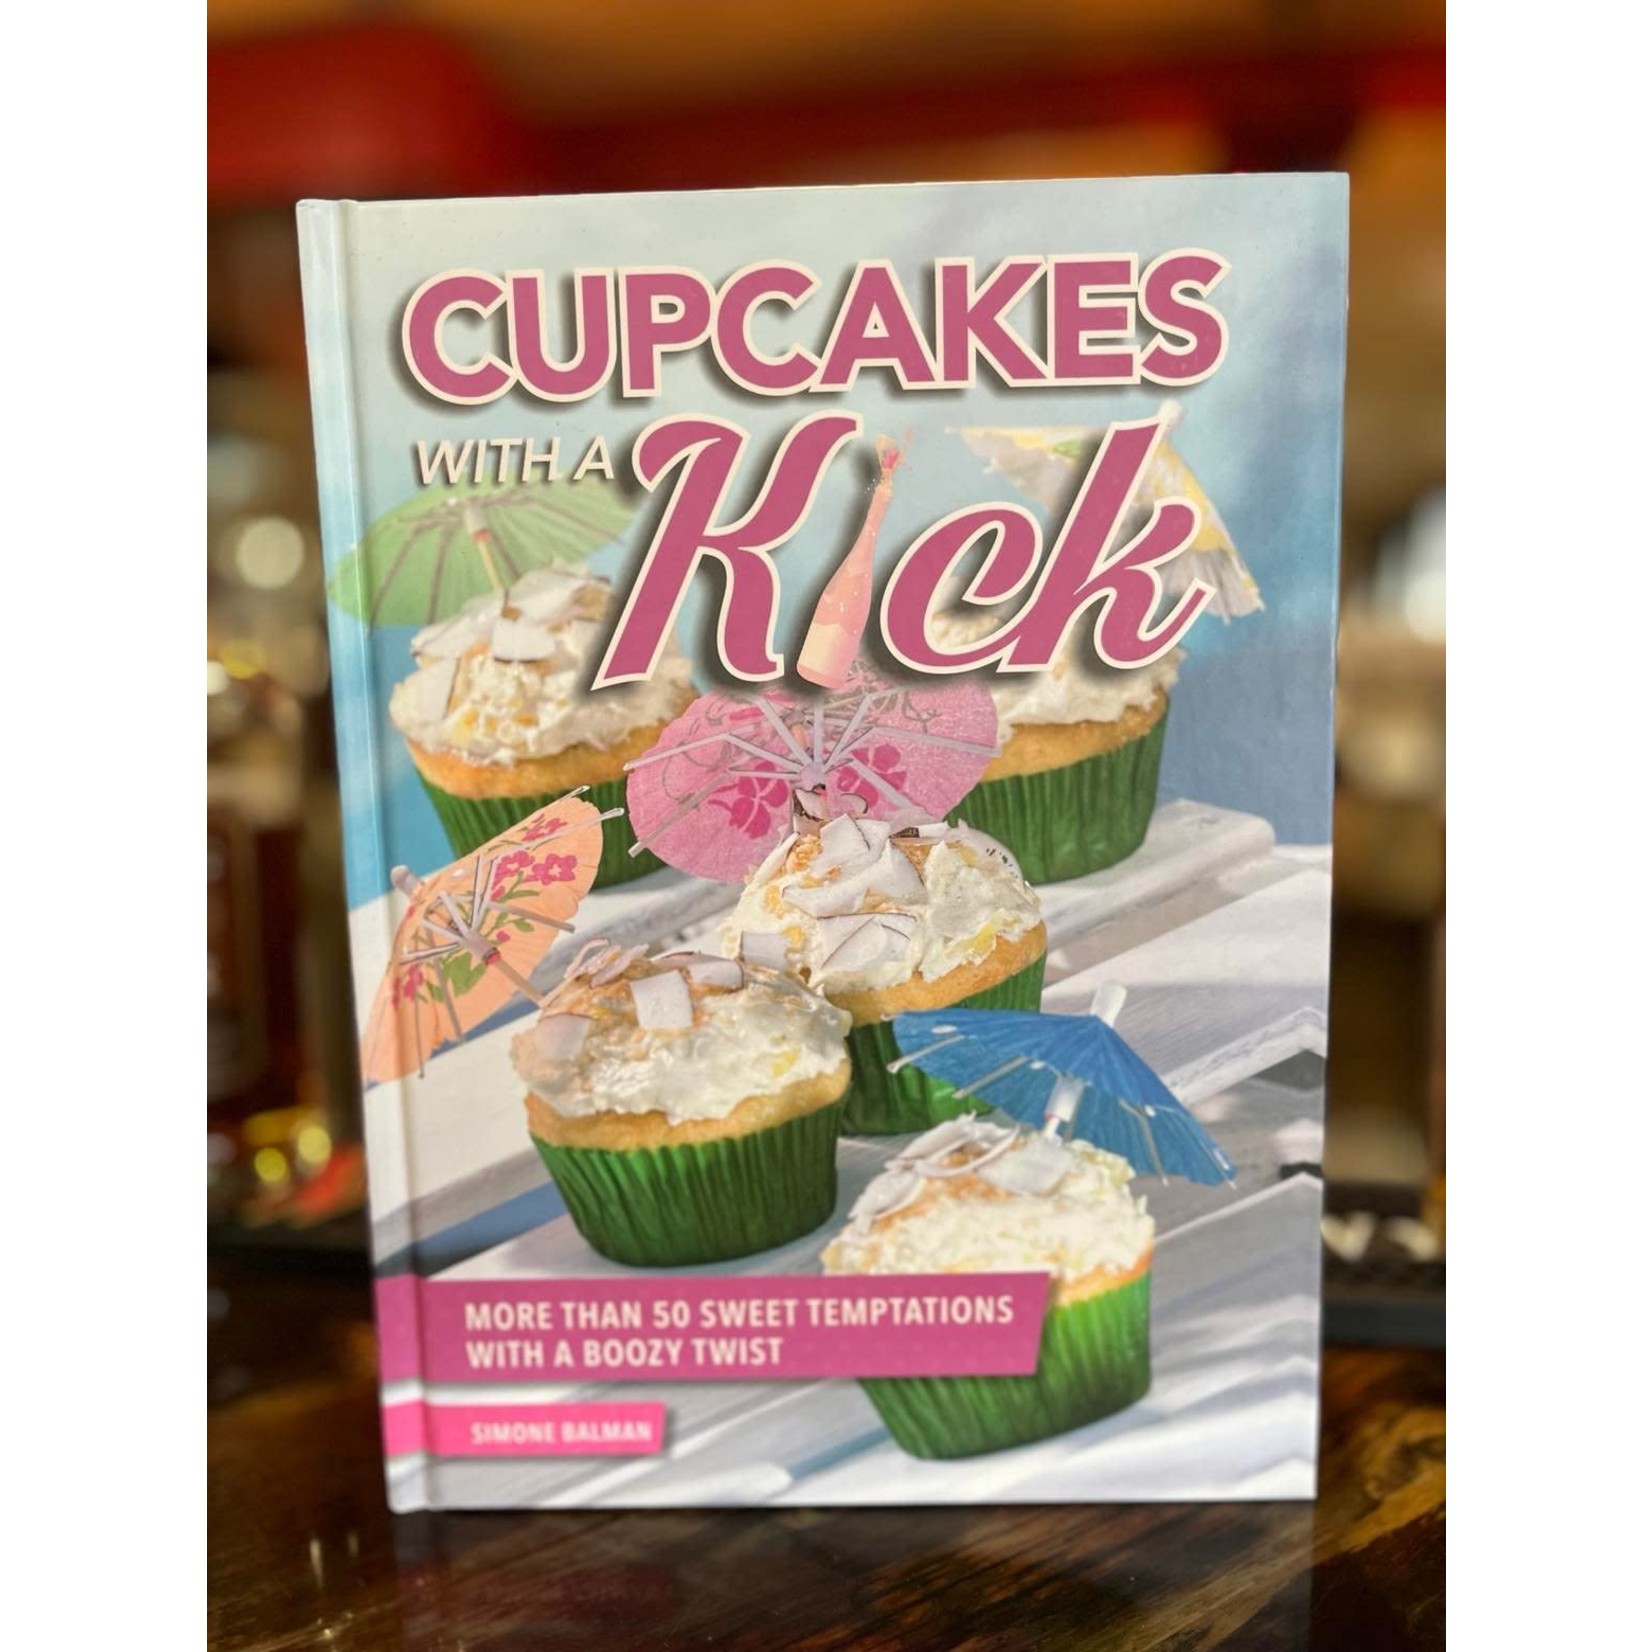 Cupcakes With a Kick